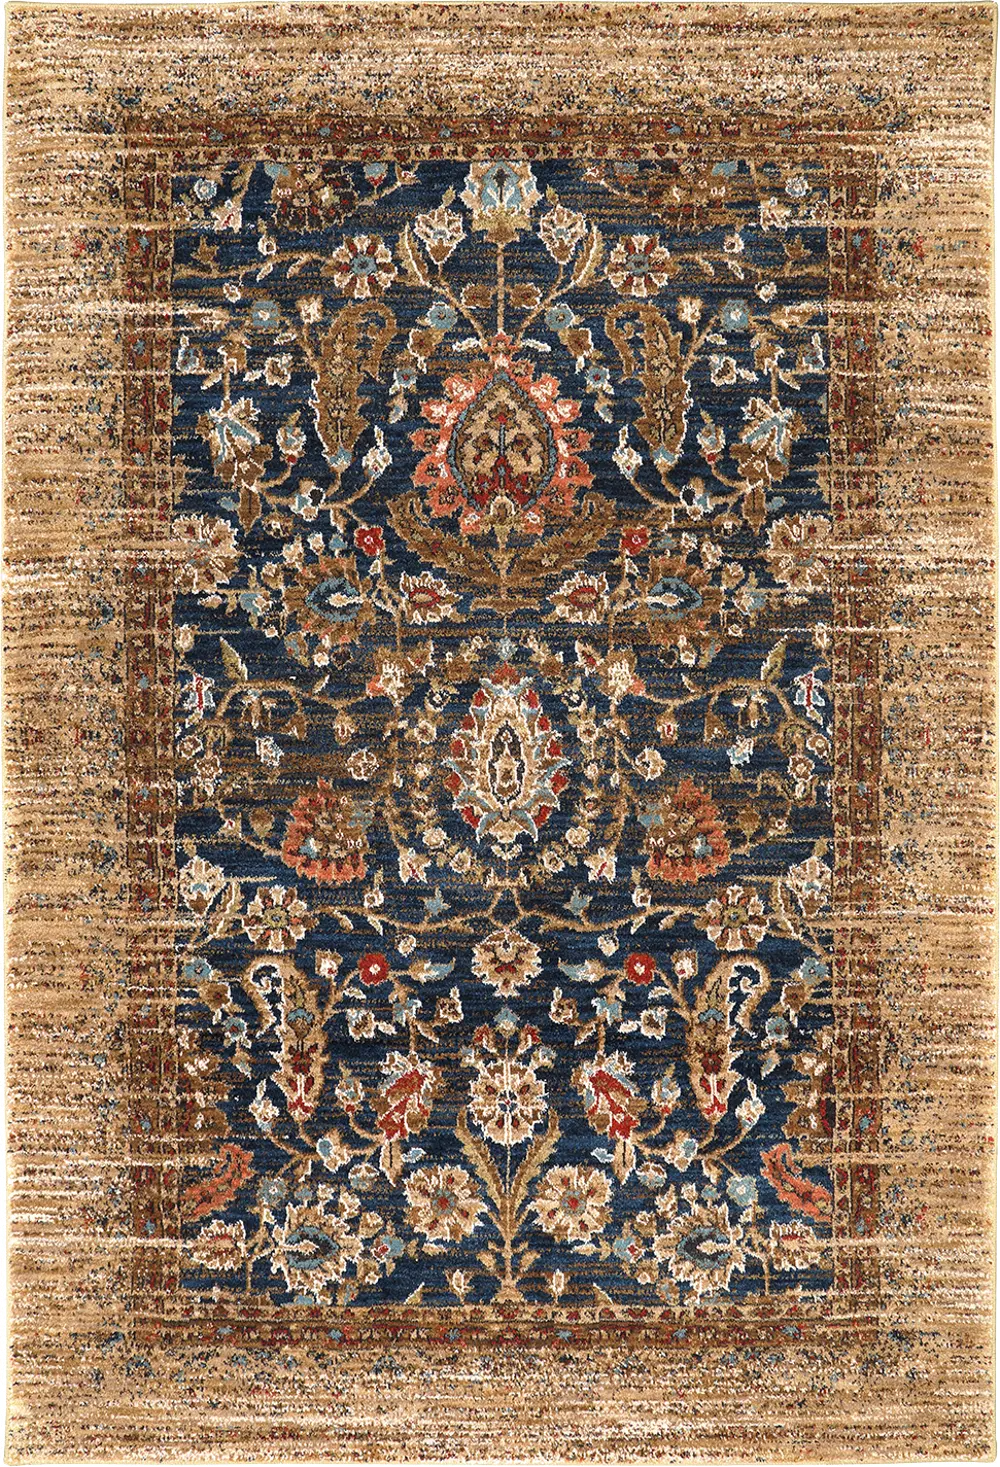 90666-10034/5X8GOLD Spice Market 5 x 8 Charax Gold Area Rug-1